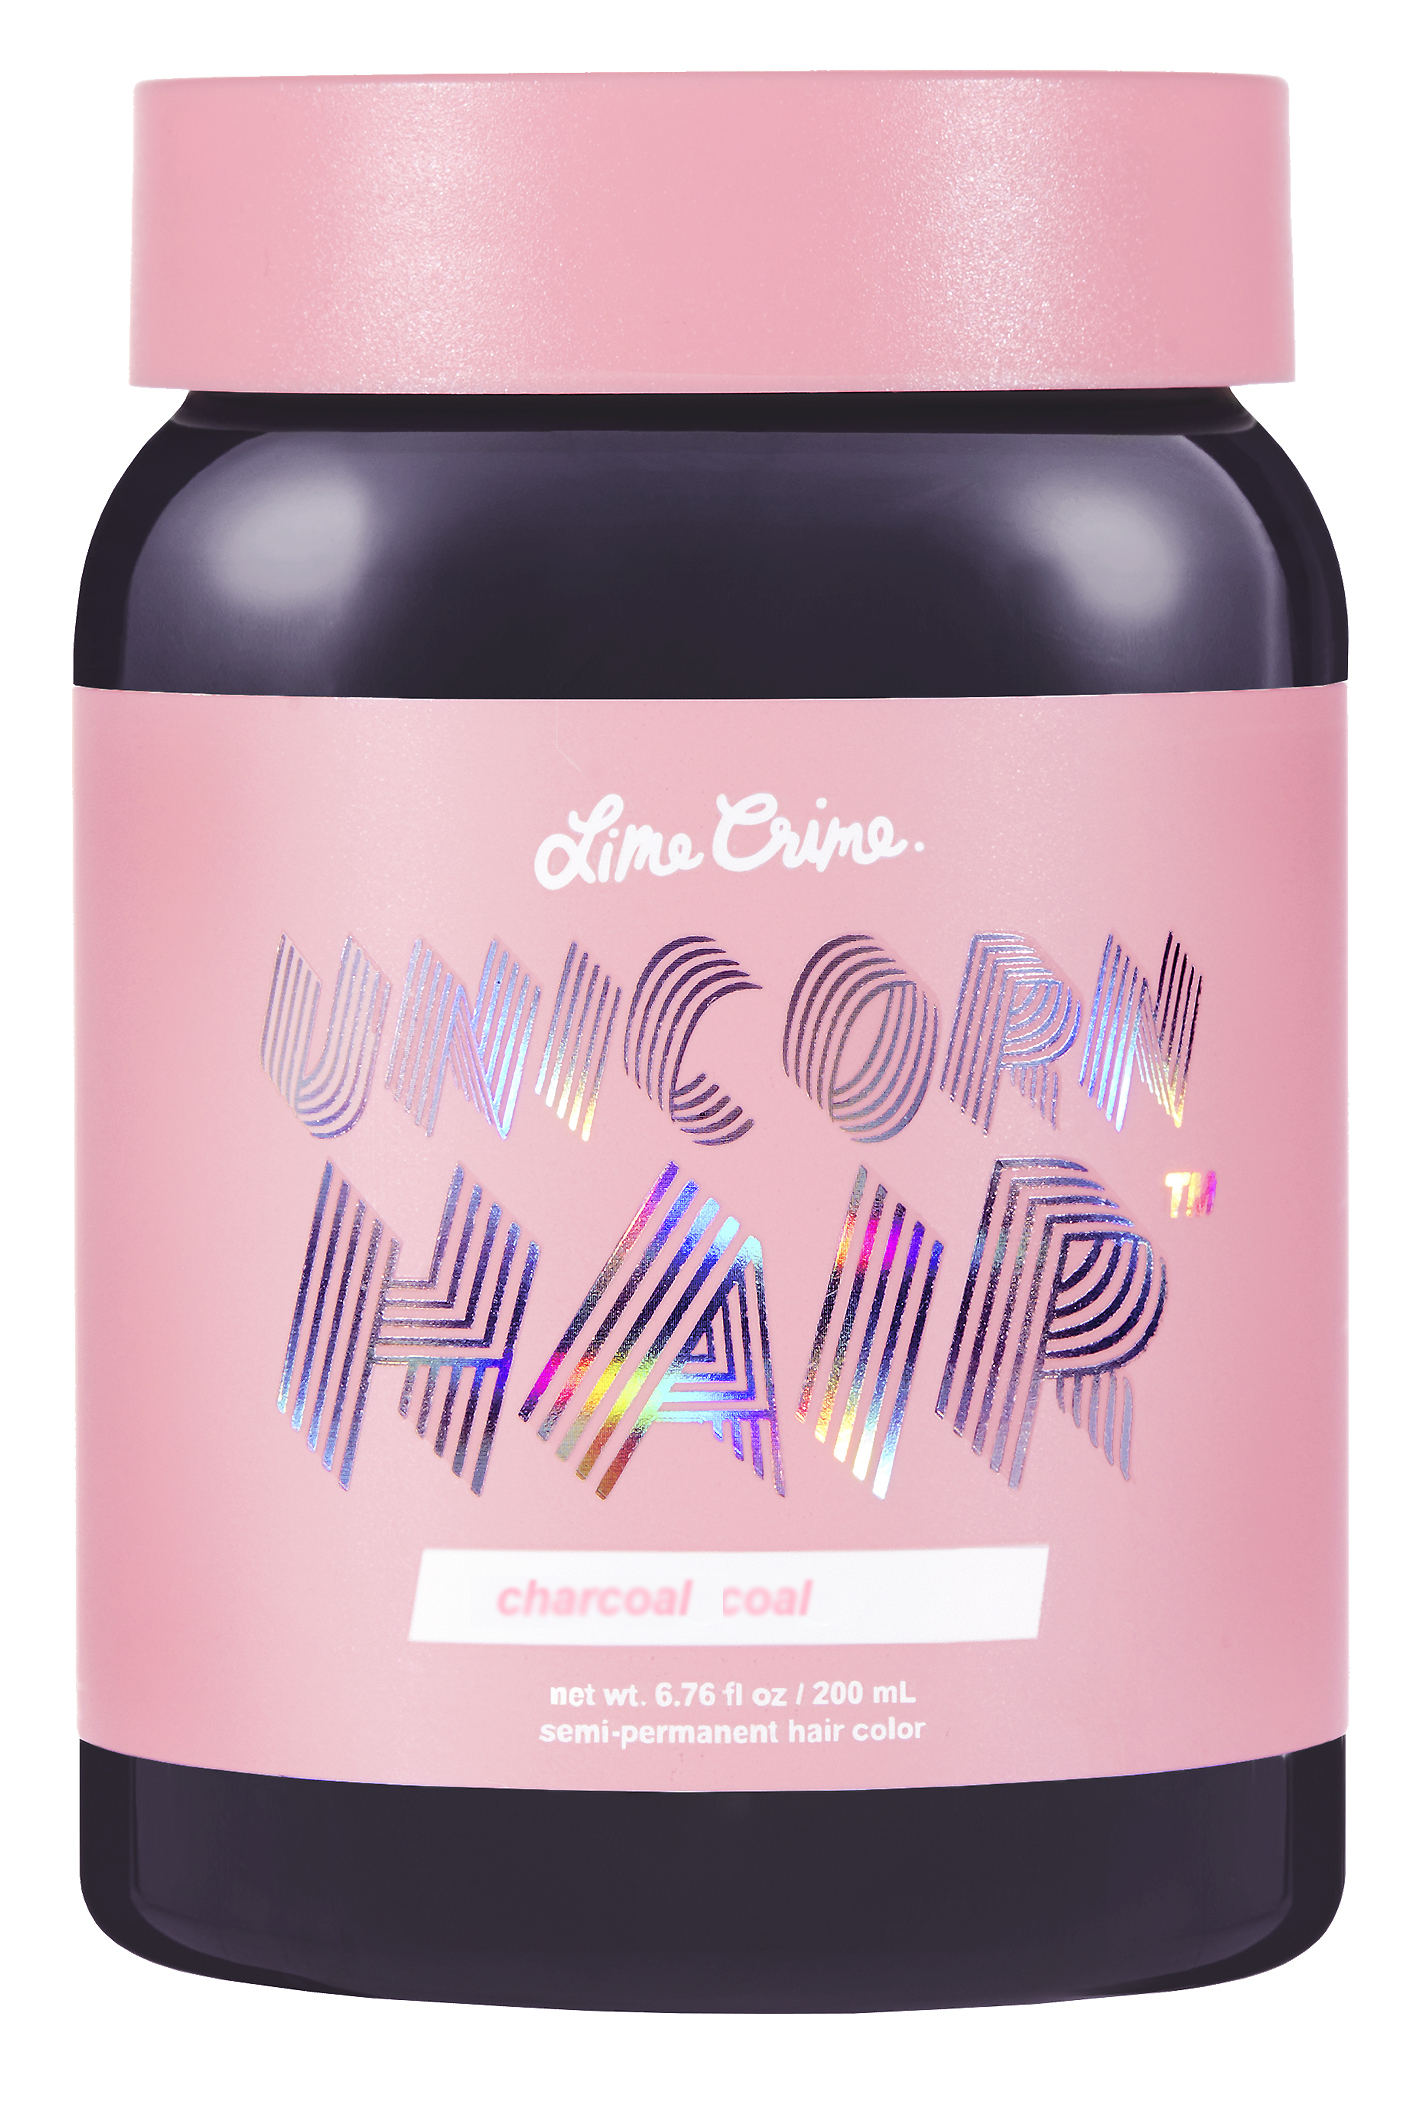 Lime Crime Unicorn Hair On Mute Grey Color Mixer